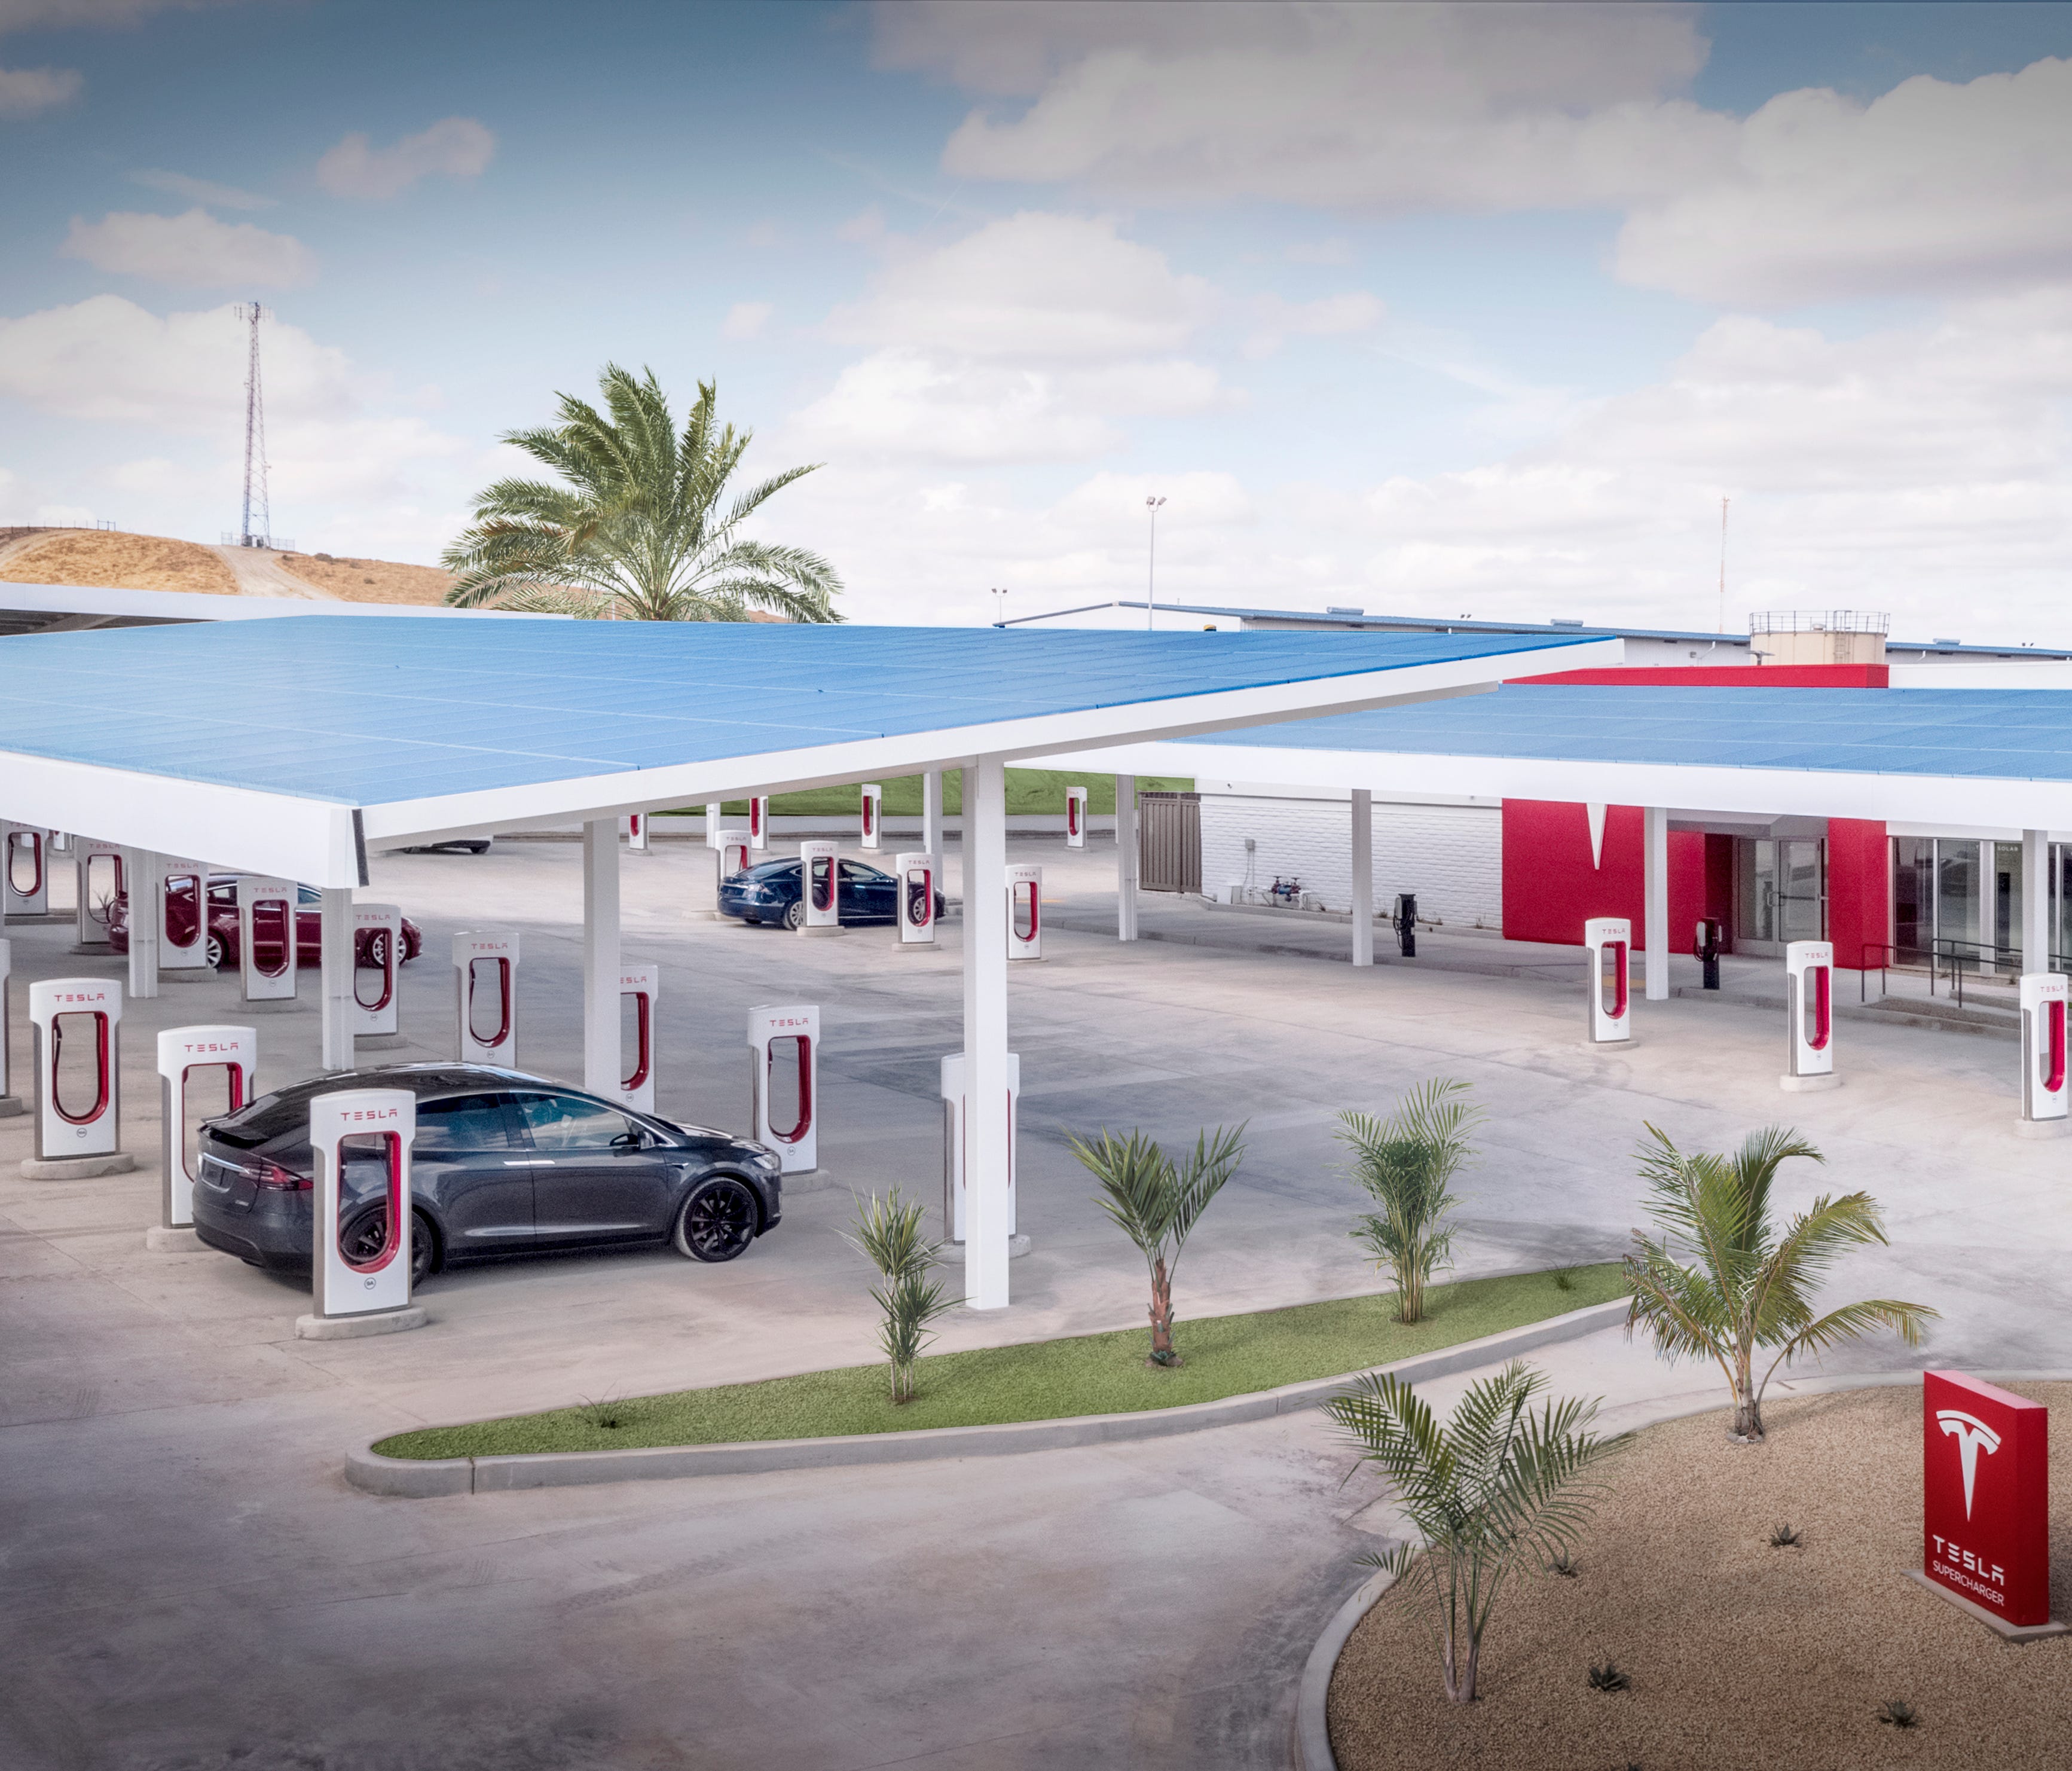 Tesla's Supercharger station in Kettleman City, Calif., is one of the company's largest. A new Supercharger station planned for Santa Monica will include a drive-in restaurant.